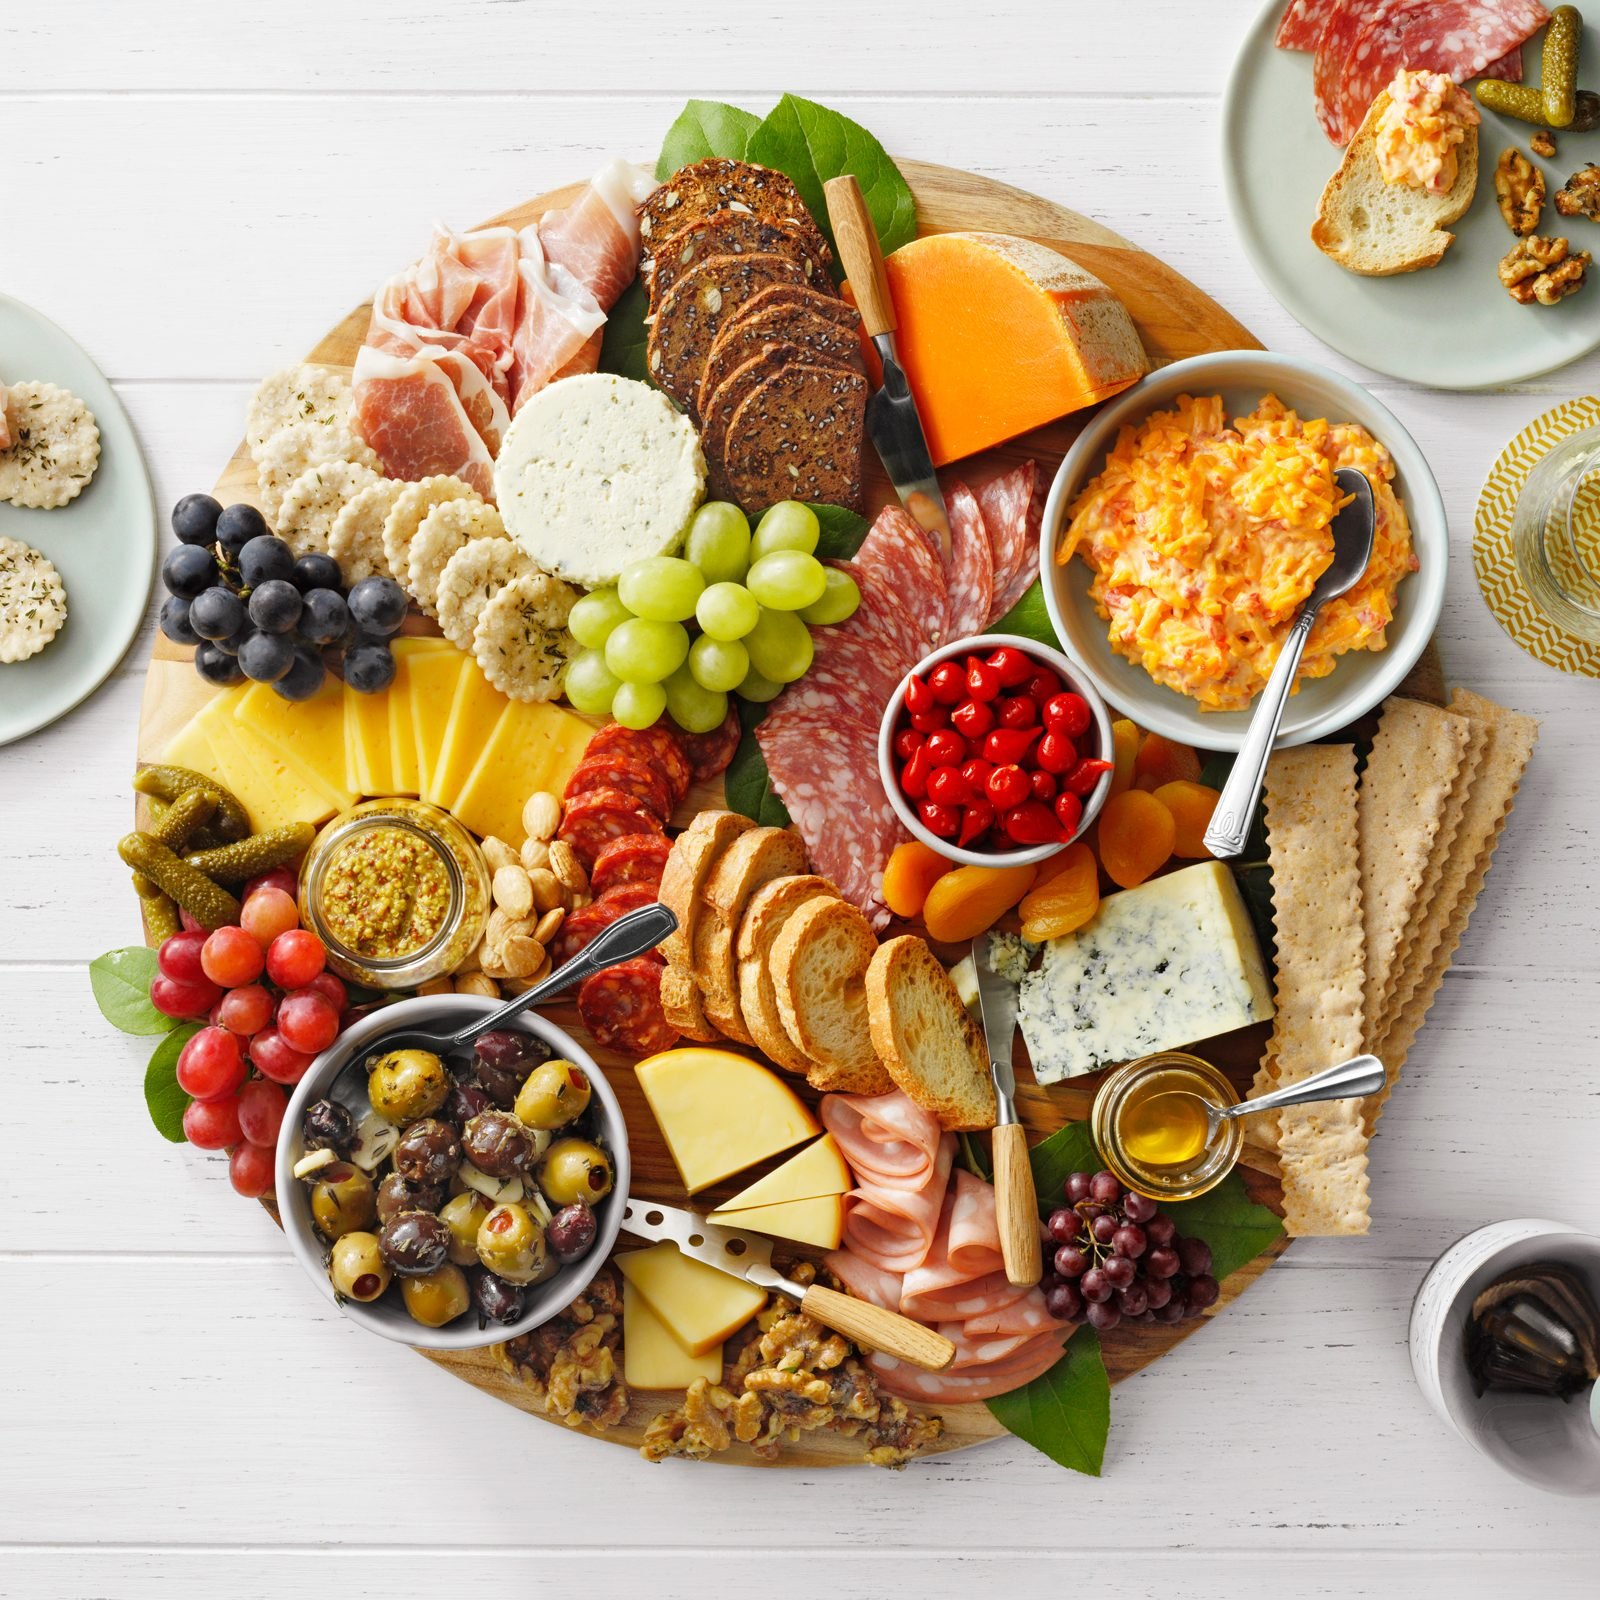 20 items we always include on our charcuterie board